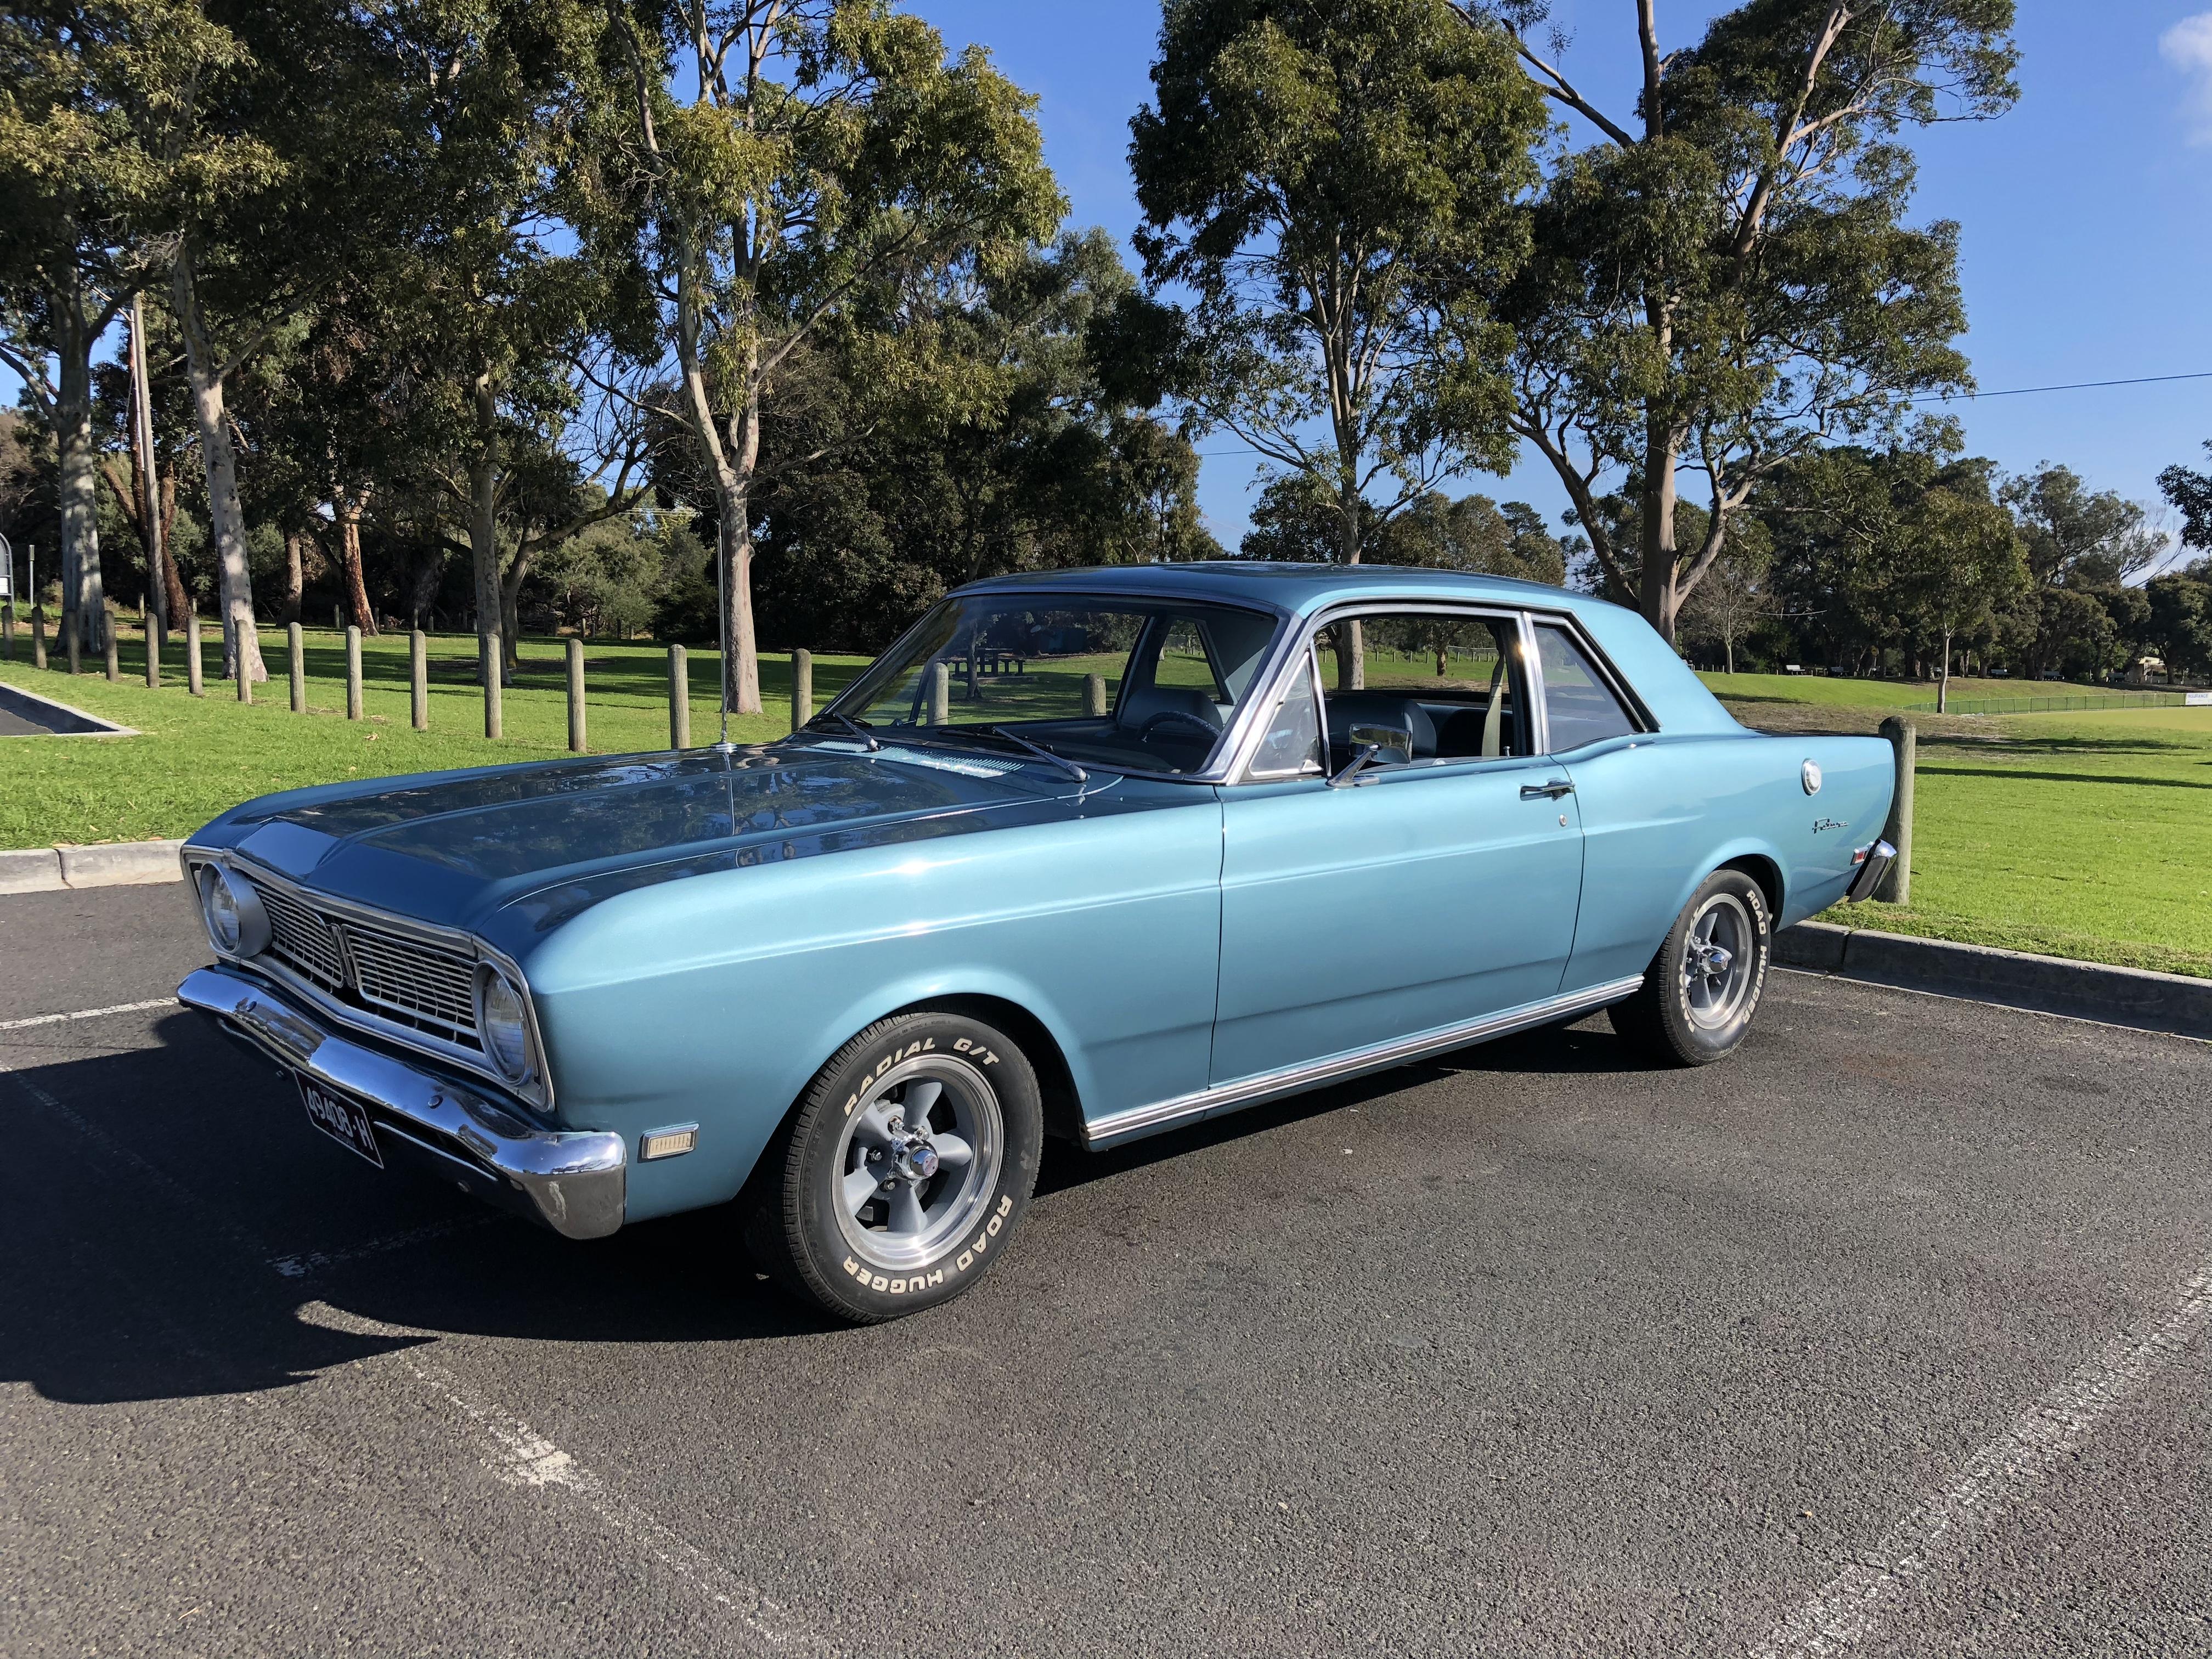 1969 ford falcon futura sports coupe jcw4107447 pagespeed noscript just cars 1969 ford falcon futura sports coupe